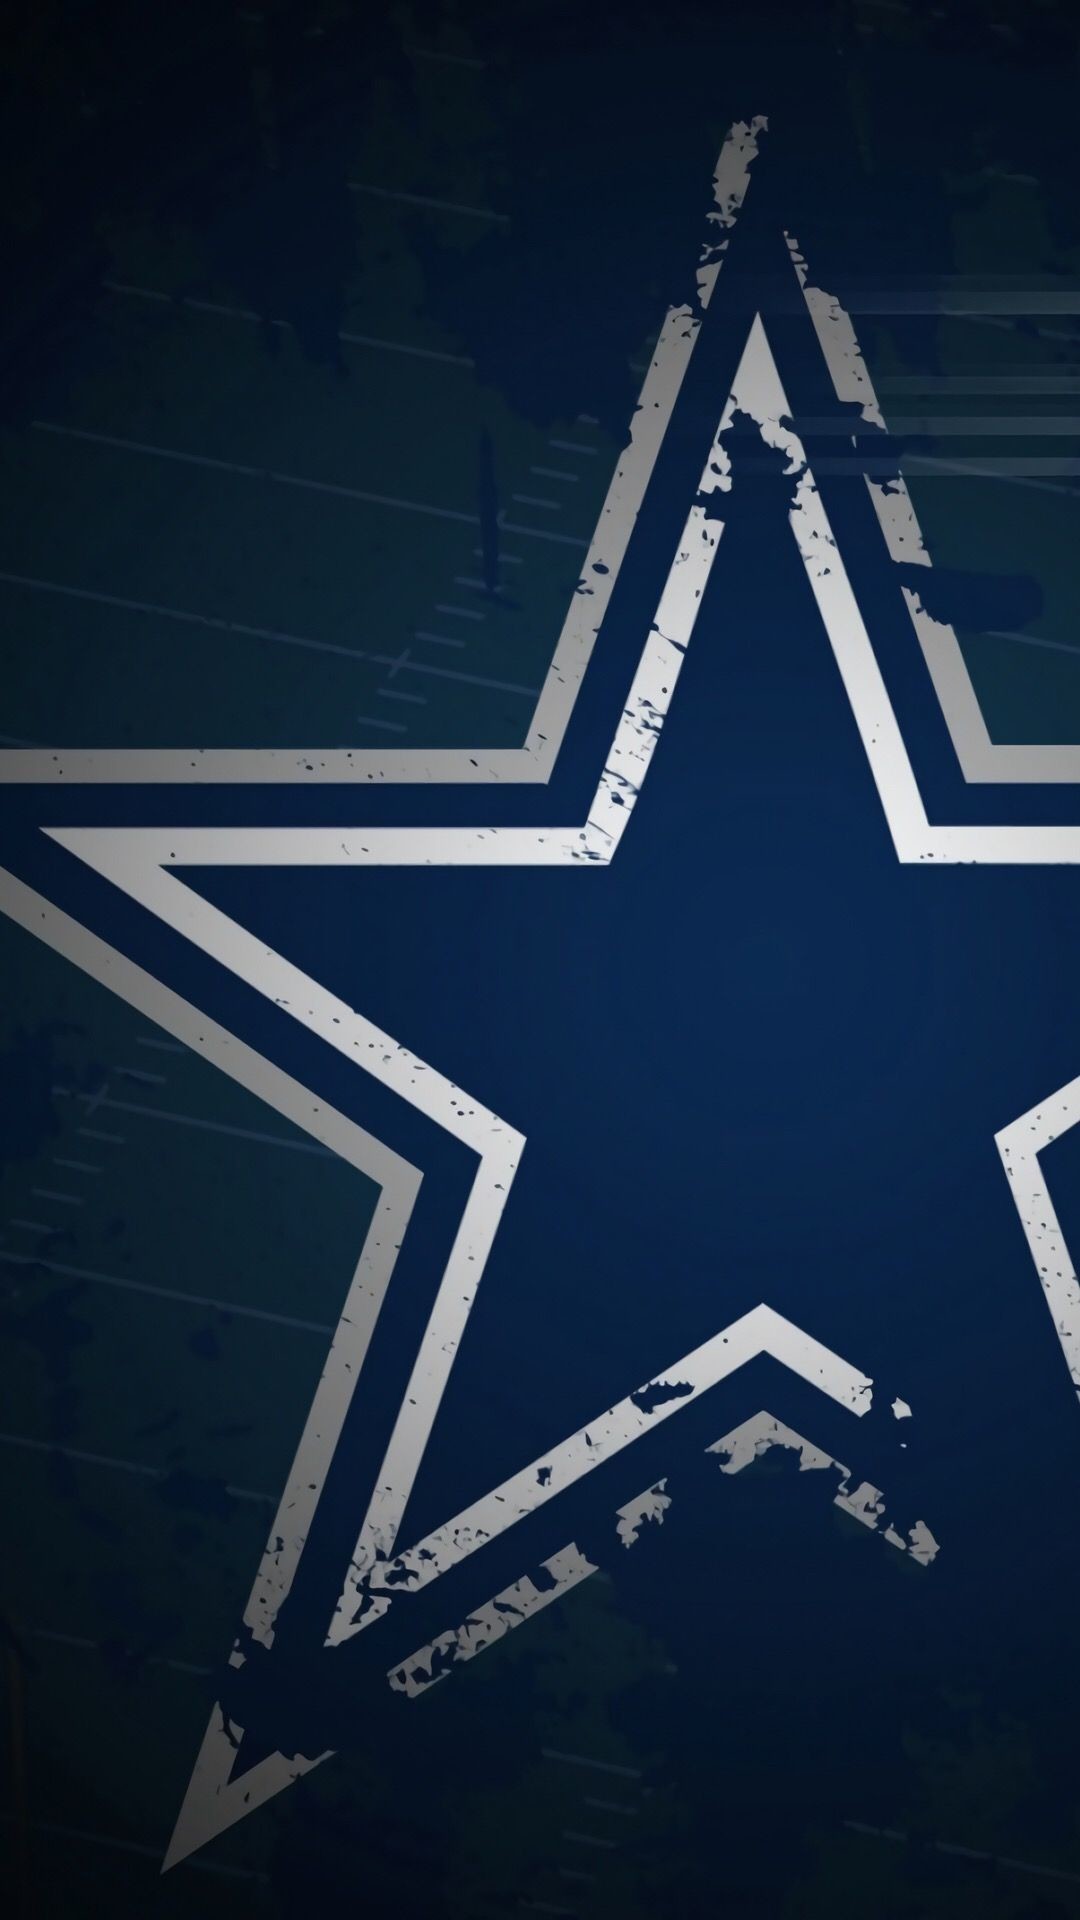 1080x1920 Pin By Hassan On 7 Plus In 2018 Cowboys Dallas